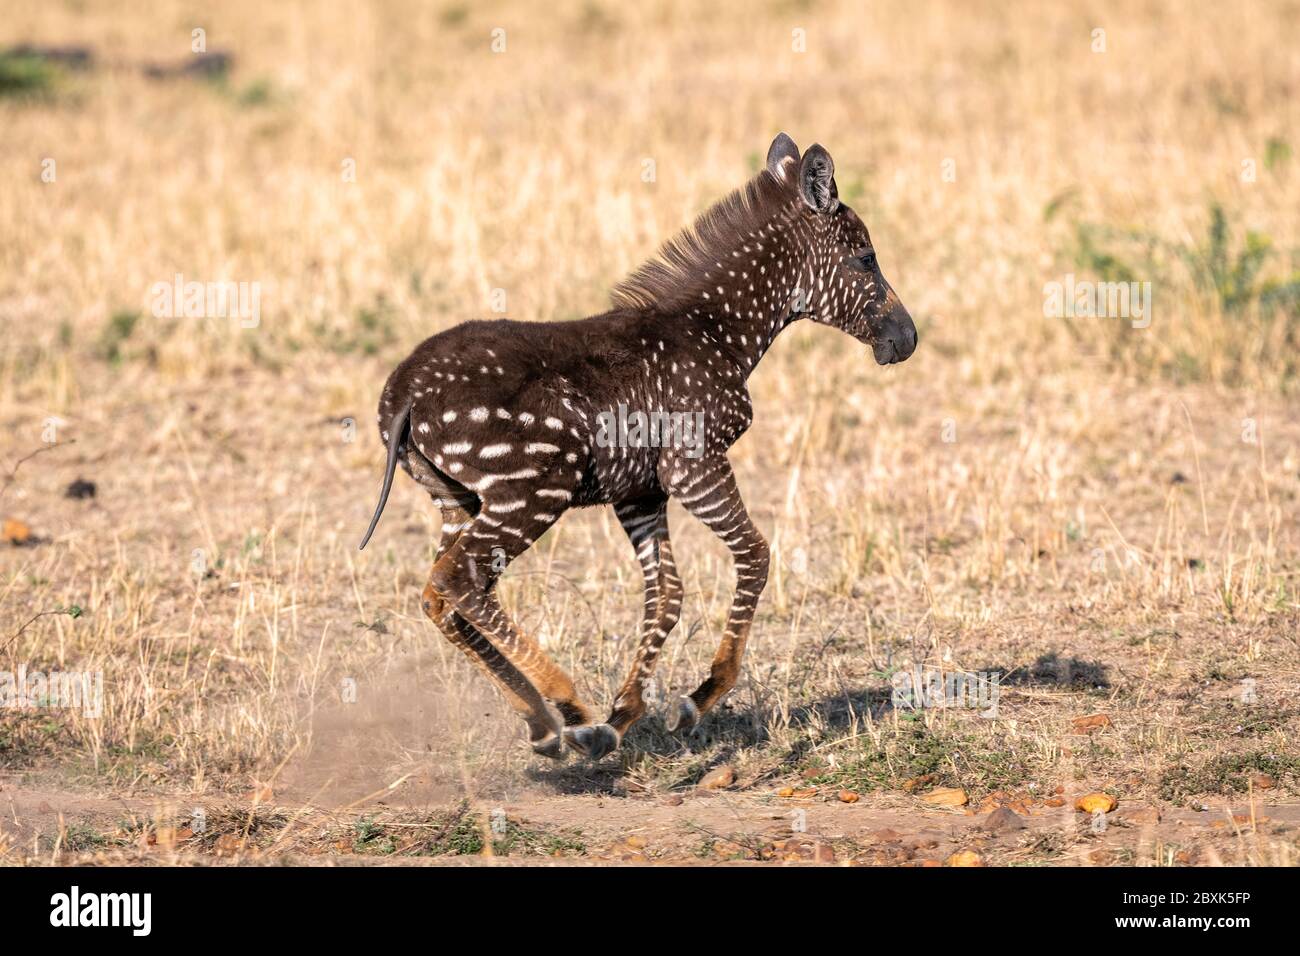 Rare zebra foal with polka dots (spots) instead of stripes, named Tira after the guide who first saw him running. Stock Photo